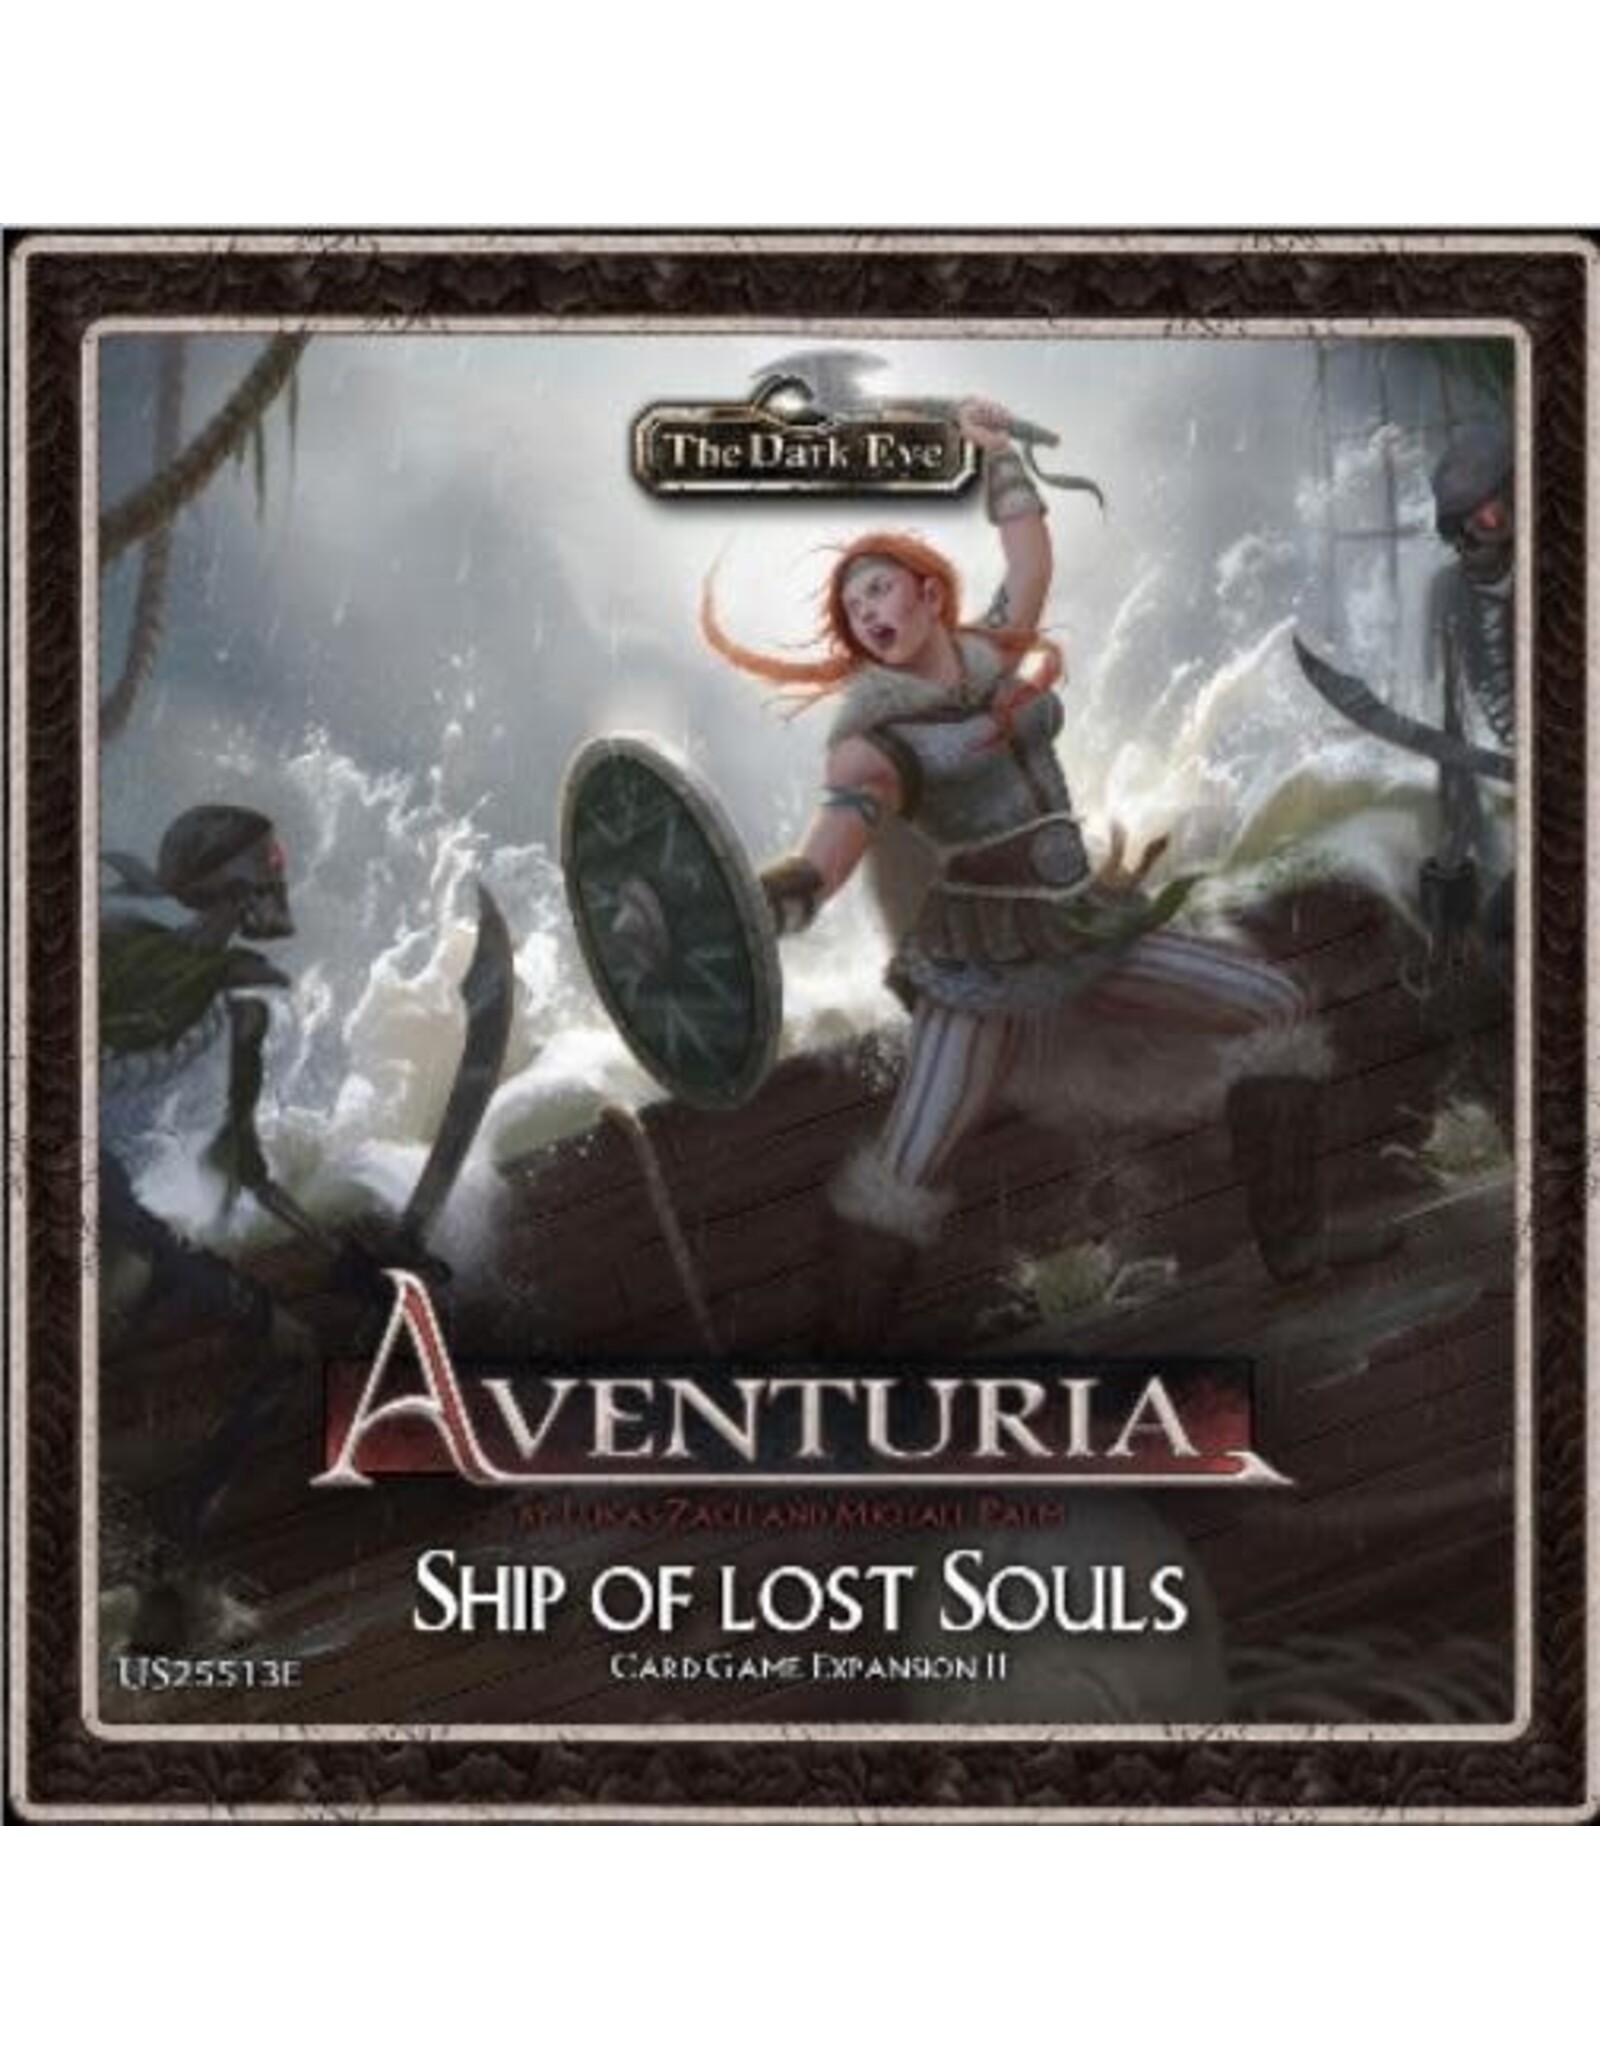 The Dark Eye: Aventuria Adventure Card Game - Ship of Lost Souls Expansion